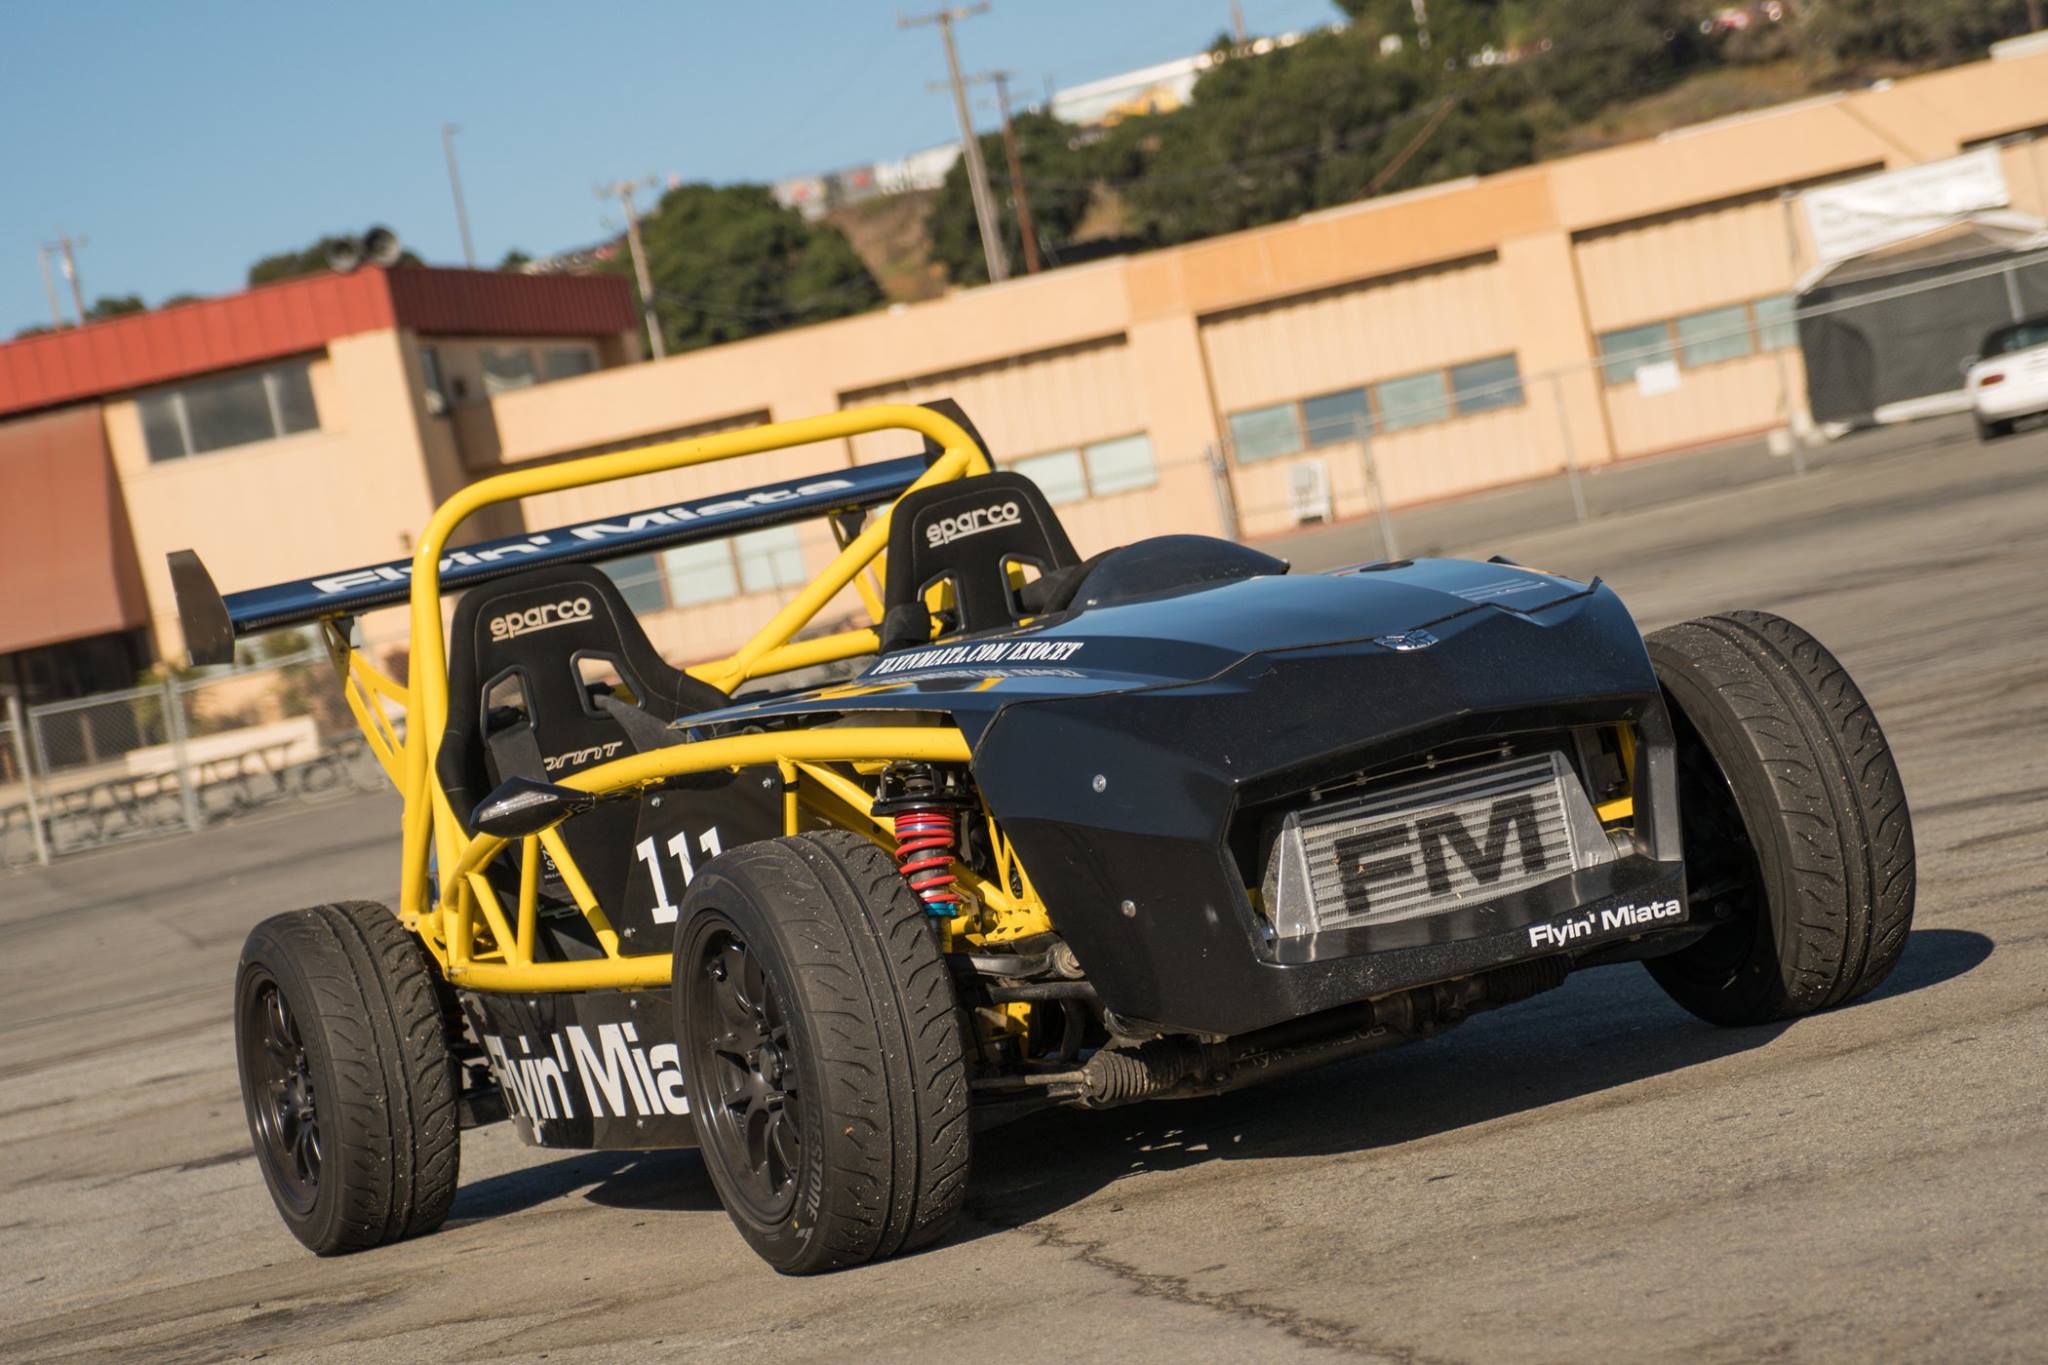 The Exocet made Autoguide’s top five at MRLS!